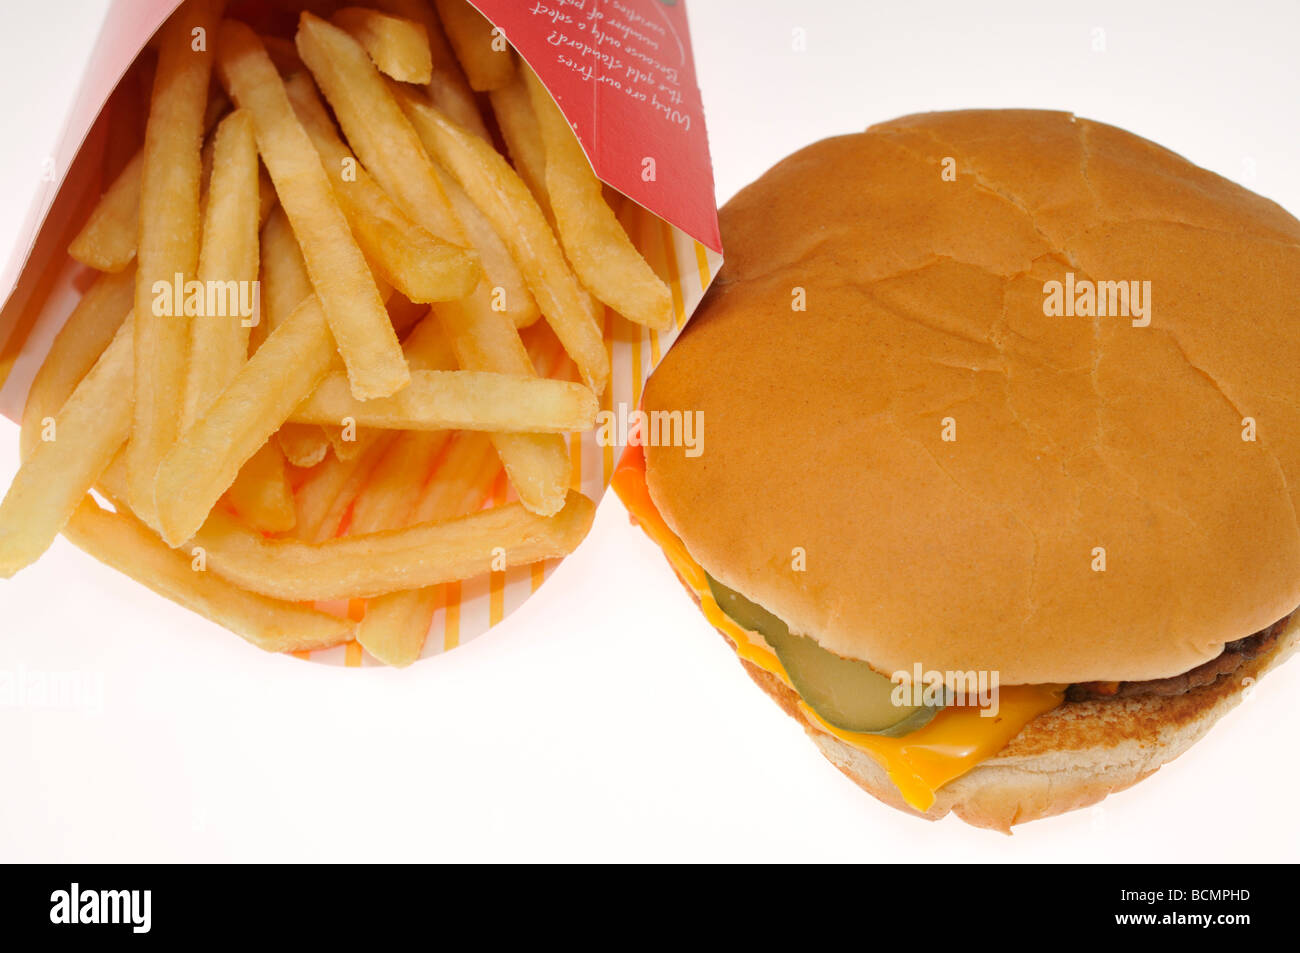 Mcdonald's cheeseburger and french fries on white background. Stock Photo